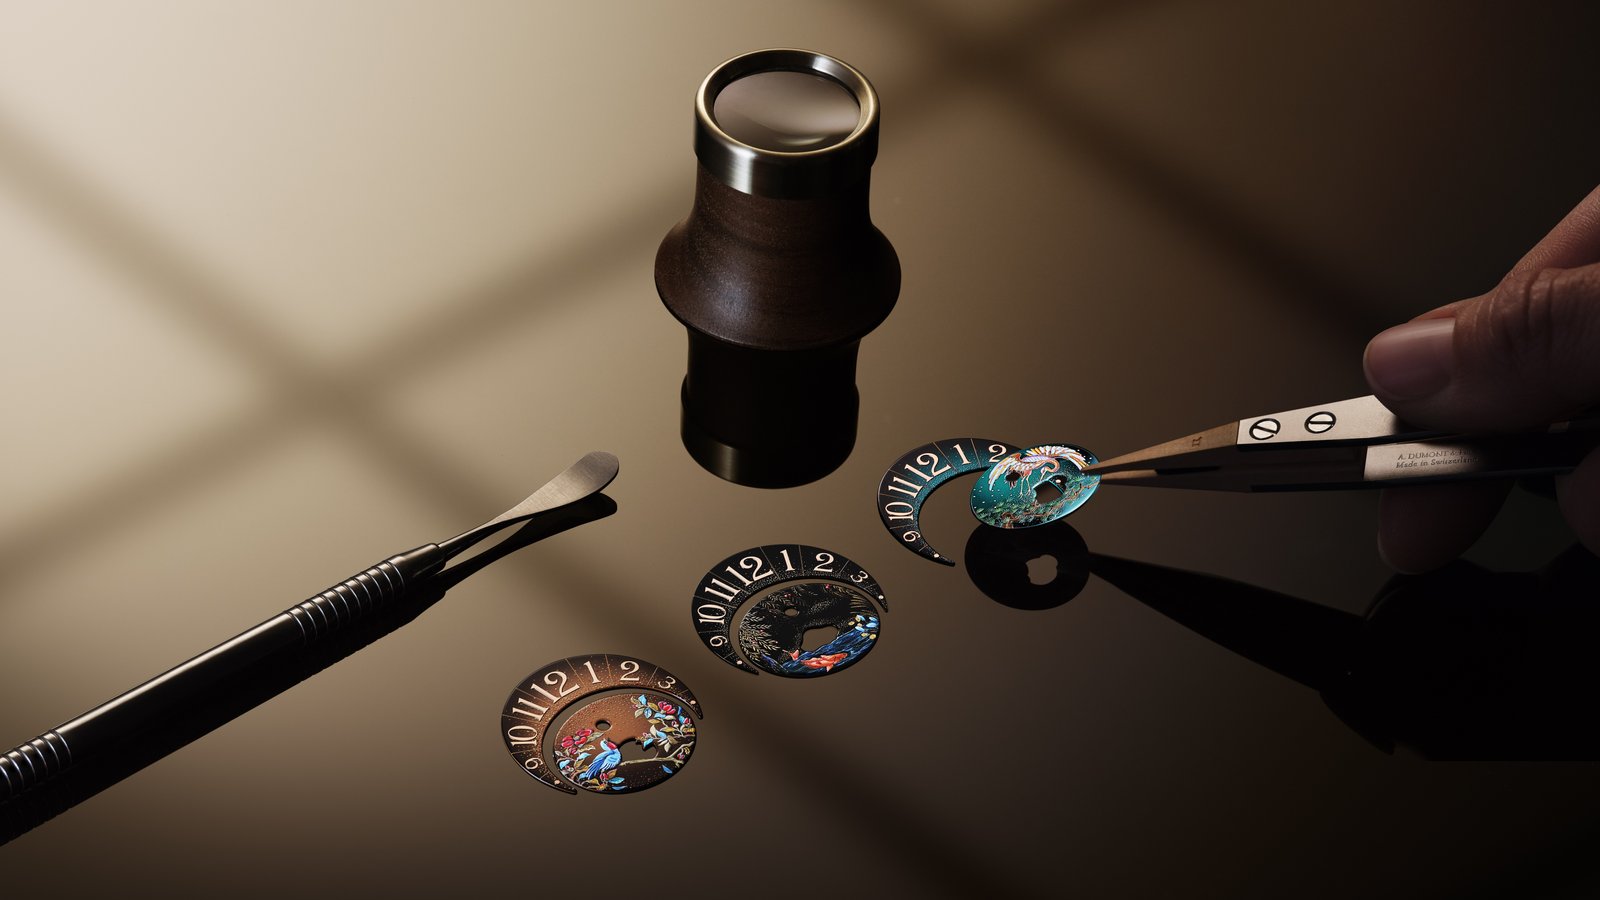 JAEGER-LECOULTRE HEATS RENDEZ-VOUS SONATINA "PEACEFUL NATURE" SERIES WITH NEW TRILOGY OF WATCHES